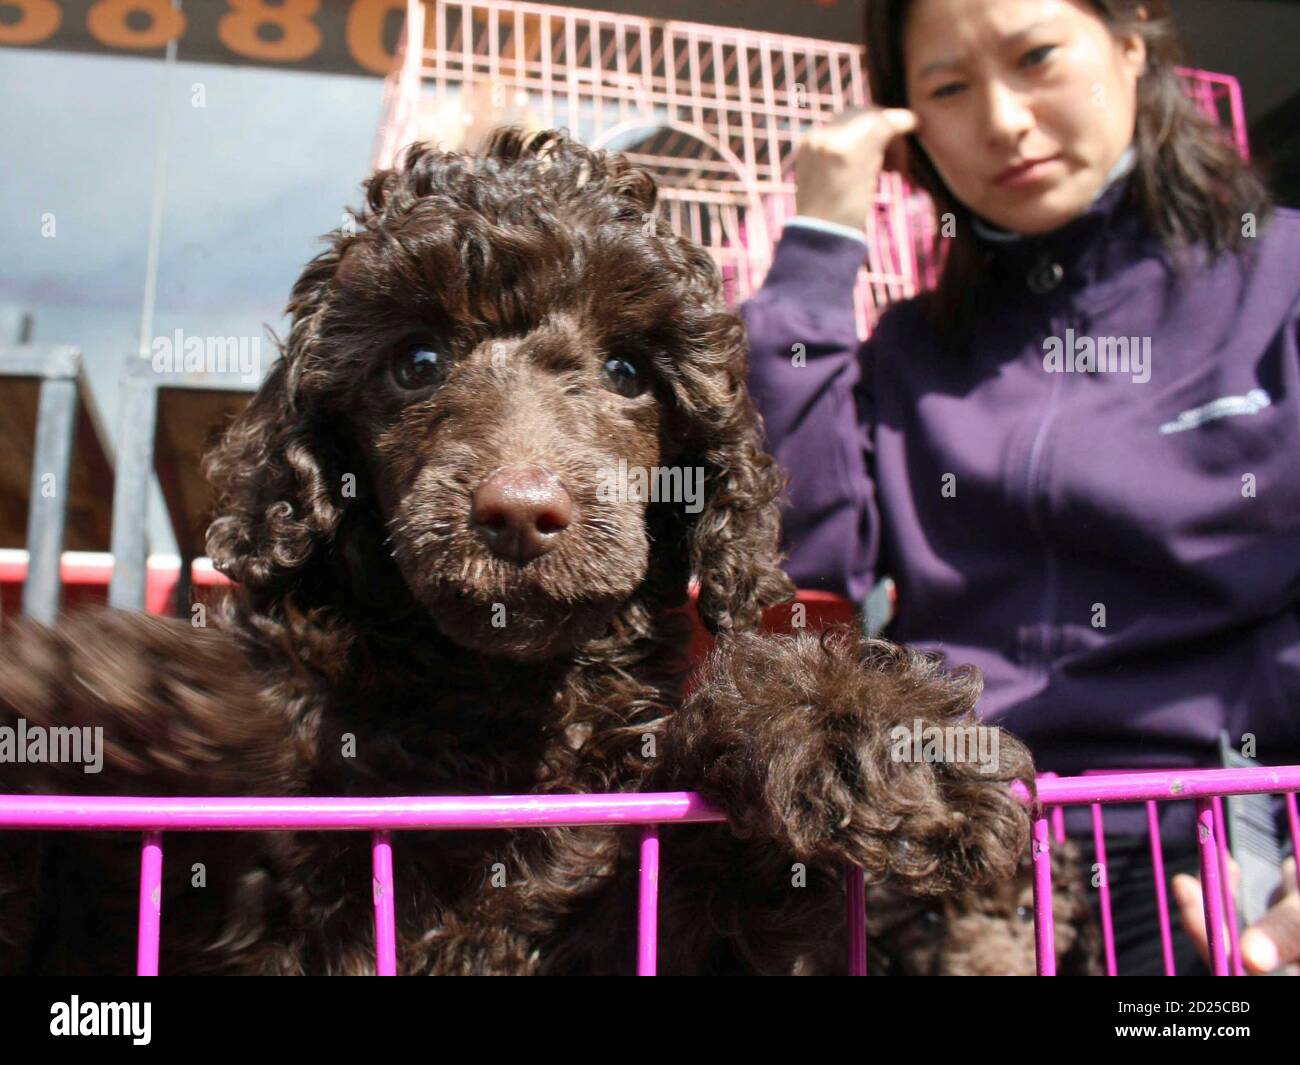 A brown poodle puppy looks over the bars of its cage as it waits to be sold at the Tongzhou dog market in Beijing October 11, 2008. The increasingly affluent China's post-1990 boom in pet dog ownership has seen exotic breeds from around the world displace old favourites such as the once ubiquitous Pekingese from Beijing city streets. Picture taken October 11.  REUTERS/Gil Murdoch (CHINA) Stock Photo